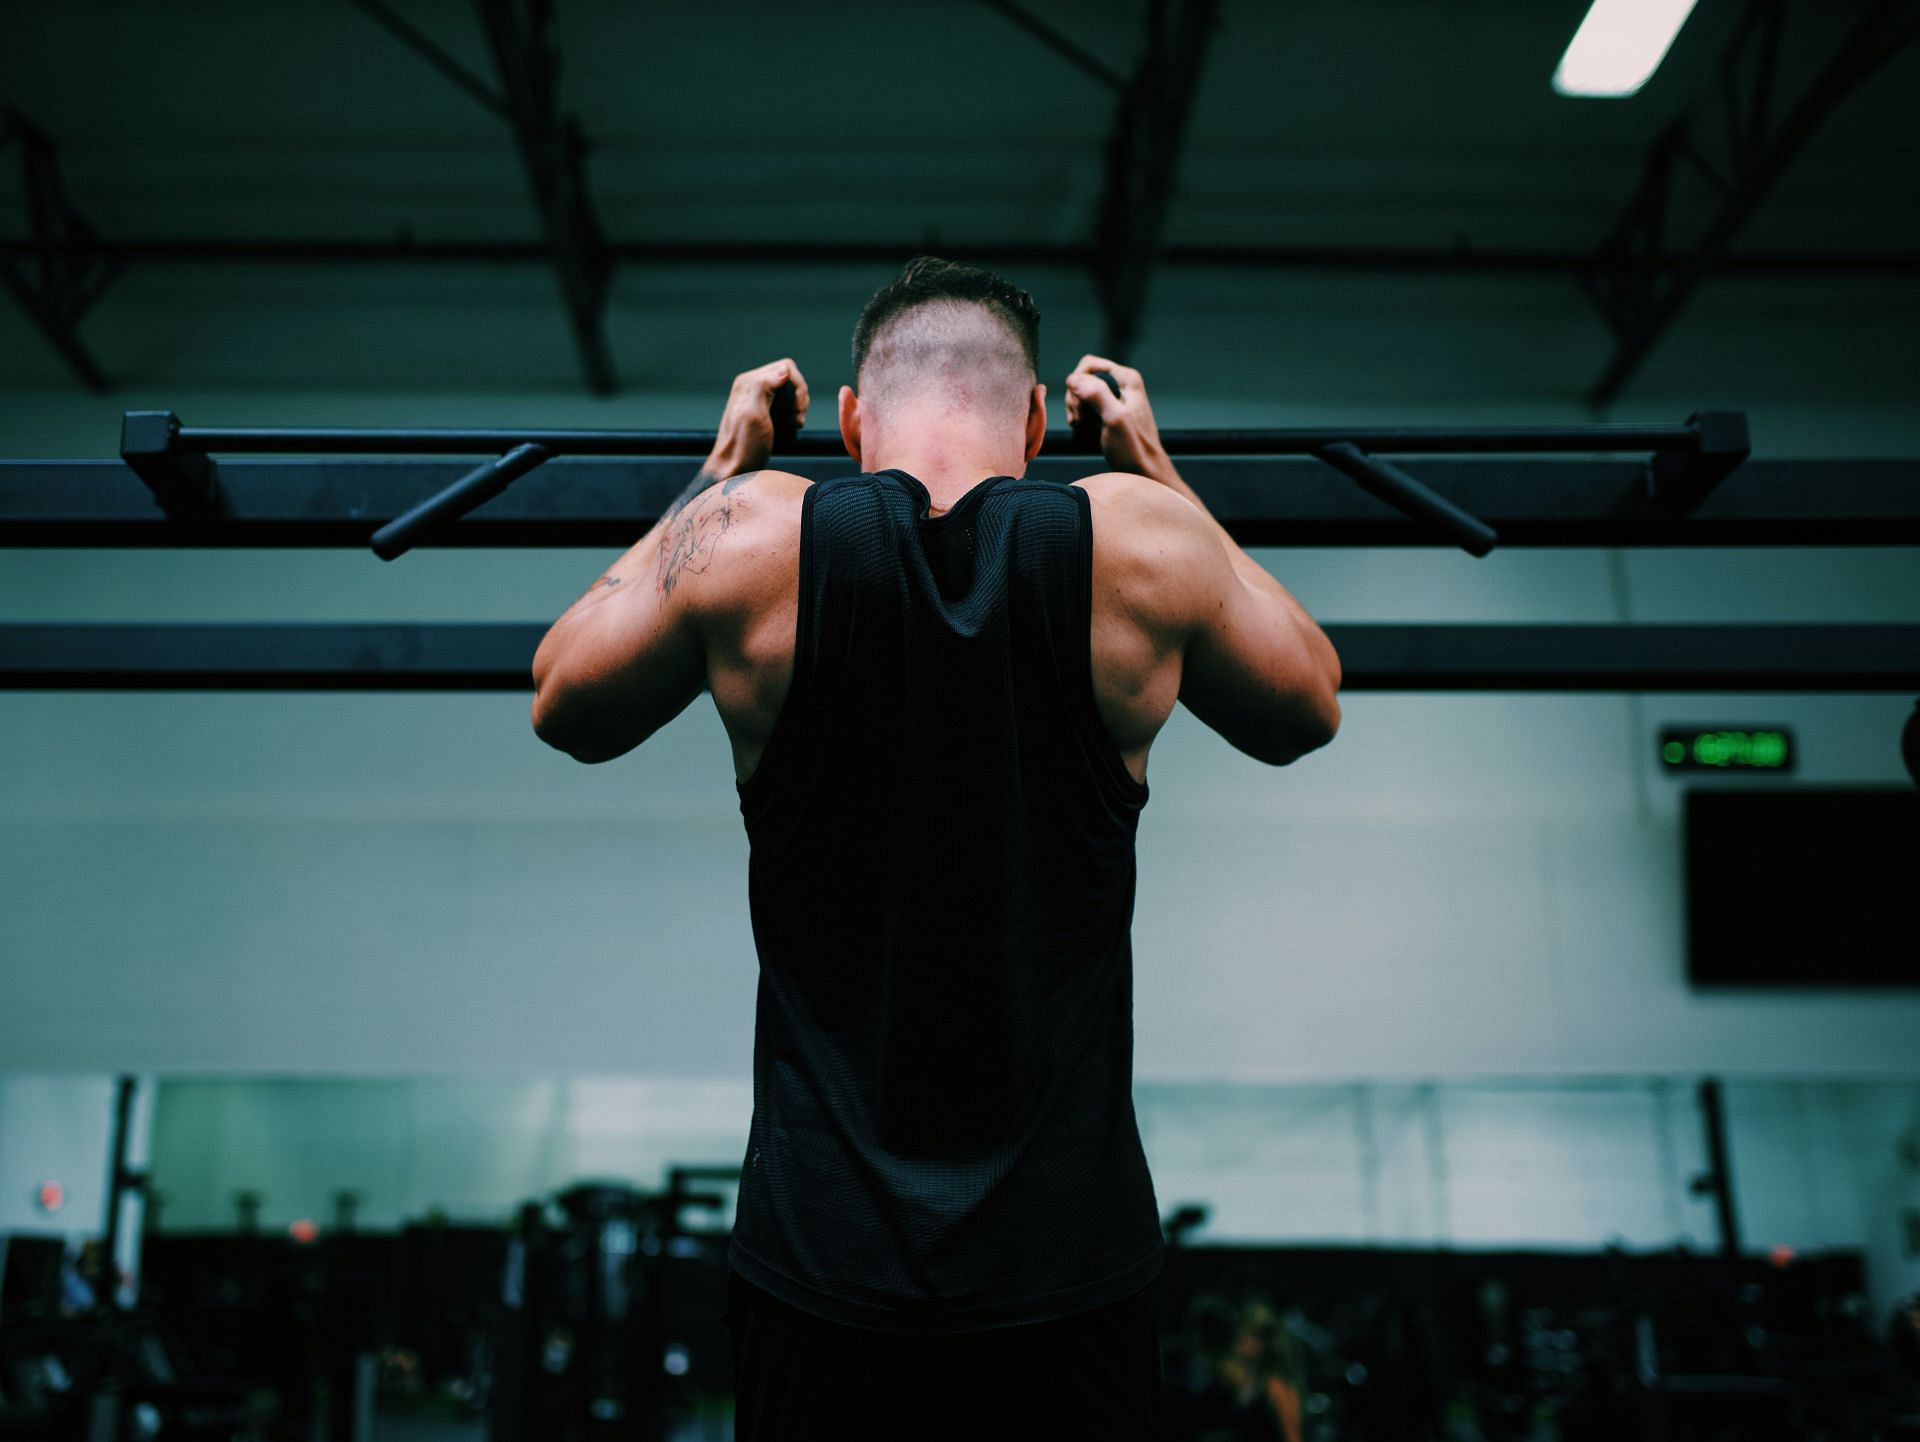 Pull-ups are a great asset for building back muscle. (Image via unsplash/Gordon Cowie)